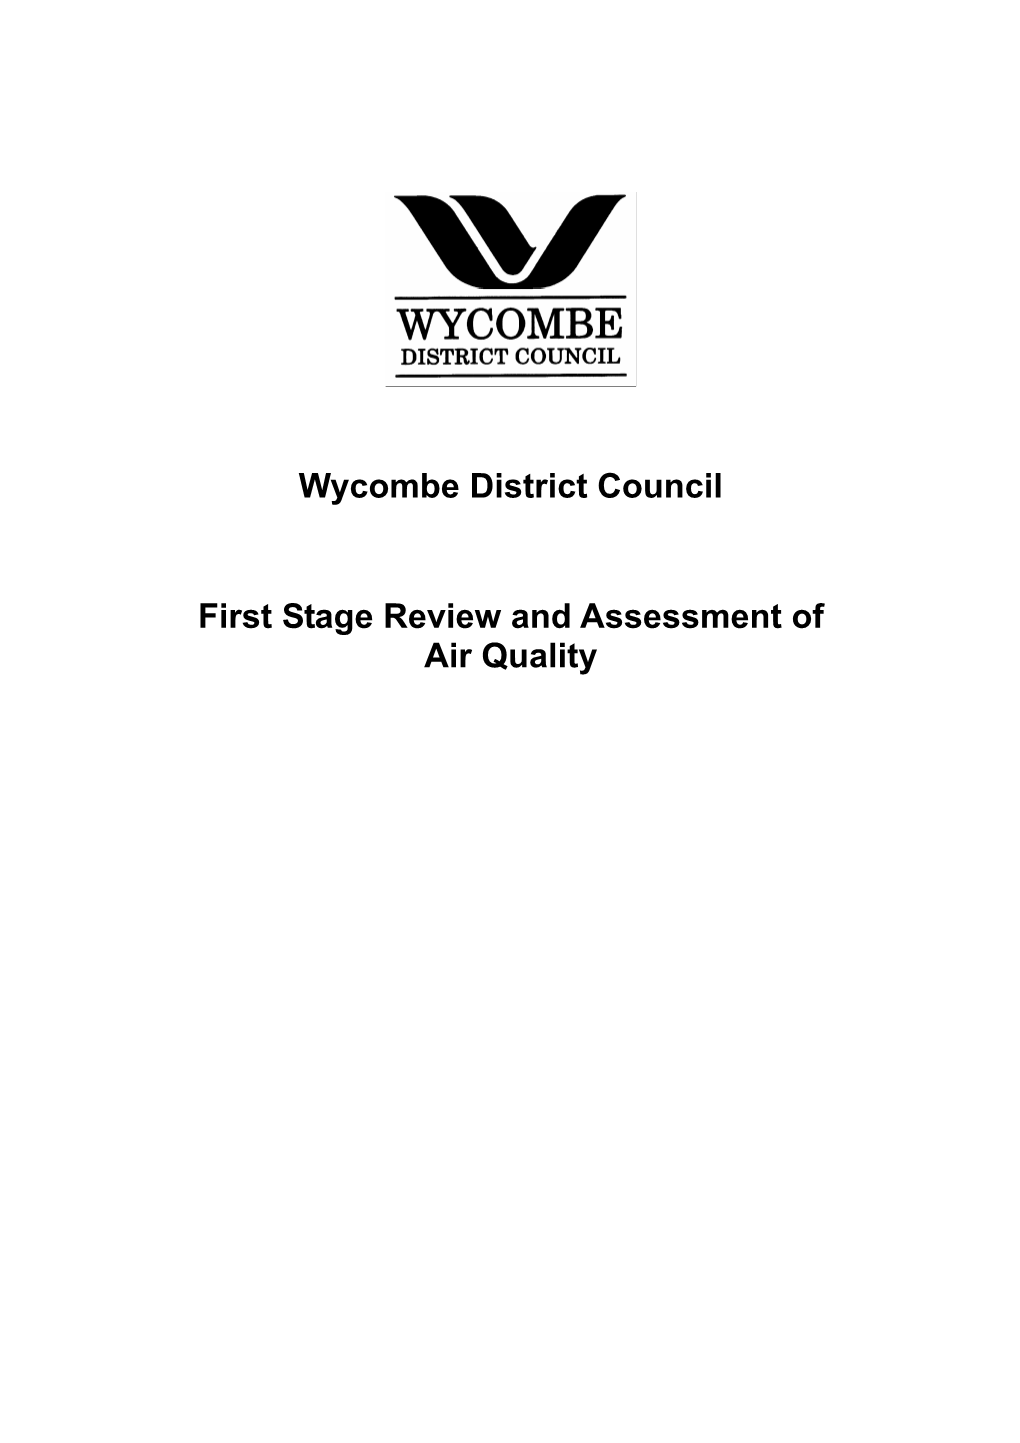 Wycombe District Council First Stage Review and Assessment of Air Quality